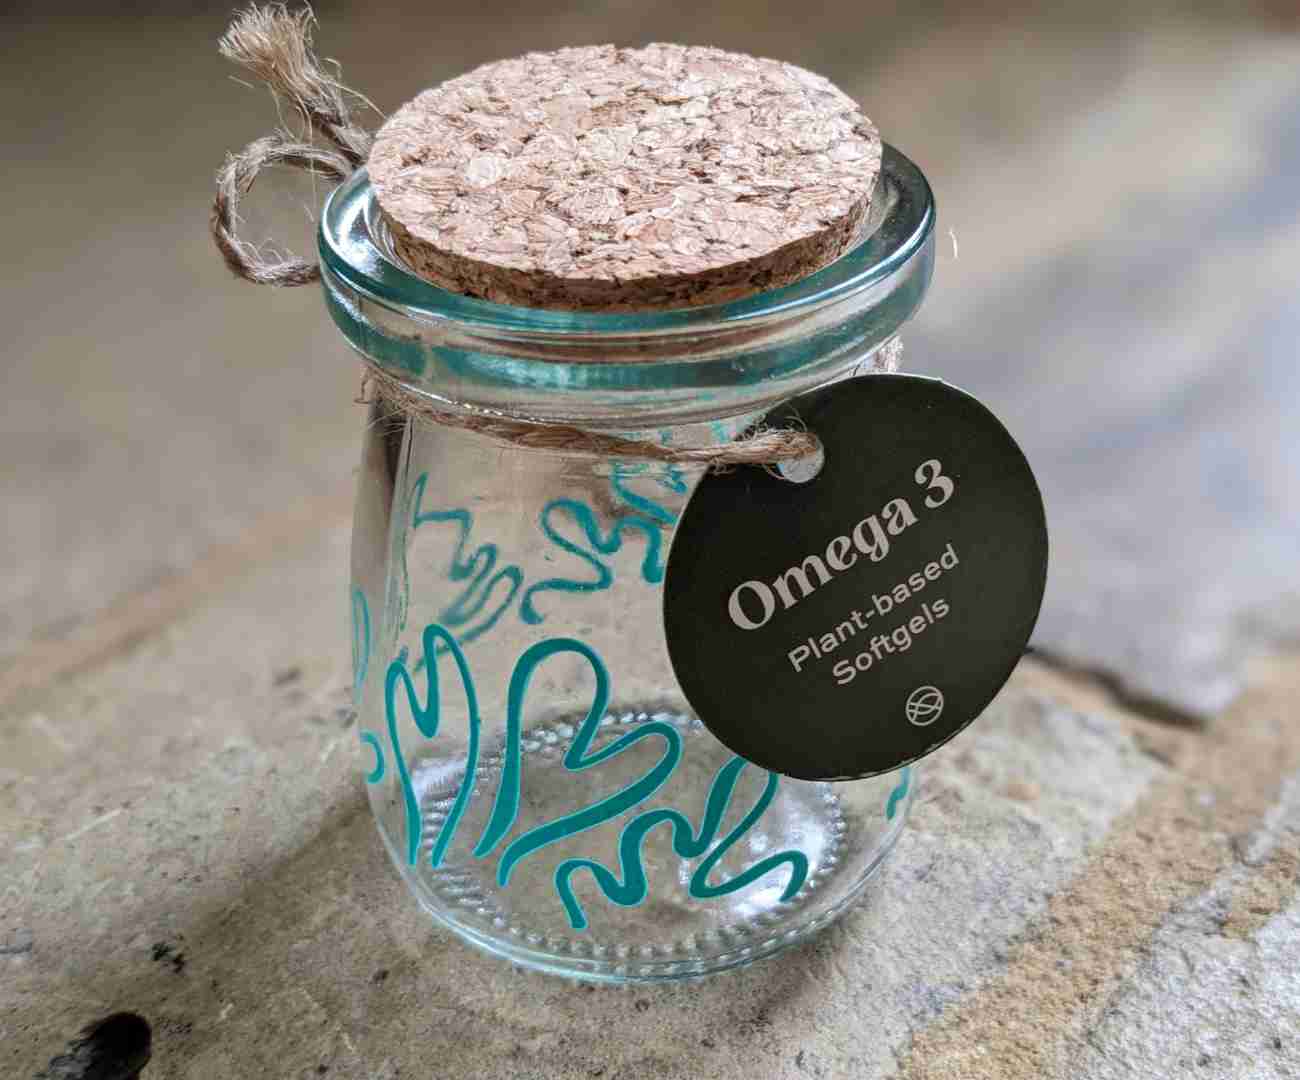 Image of a small clear glass jar, with blue/green swirly patterns painted on it, with a piece of string tied around the neck and a cork lid, giving it a rustic, natural feel. The jar is empty but is designed to contain soft gel capsules containing omega 3. The jar is sitting on a rustic brick floor. This is to illustrate this best vegan omega 3 supplements uk guide